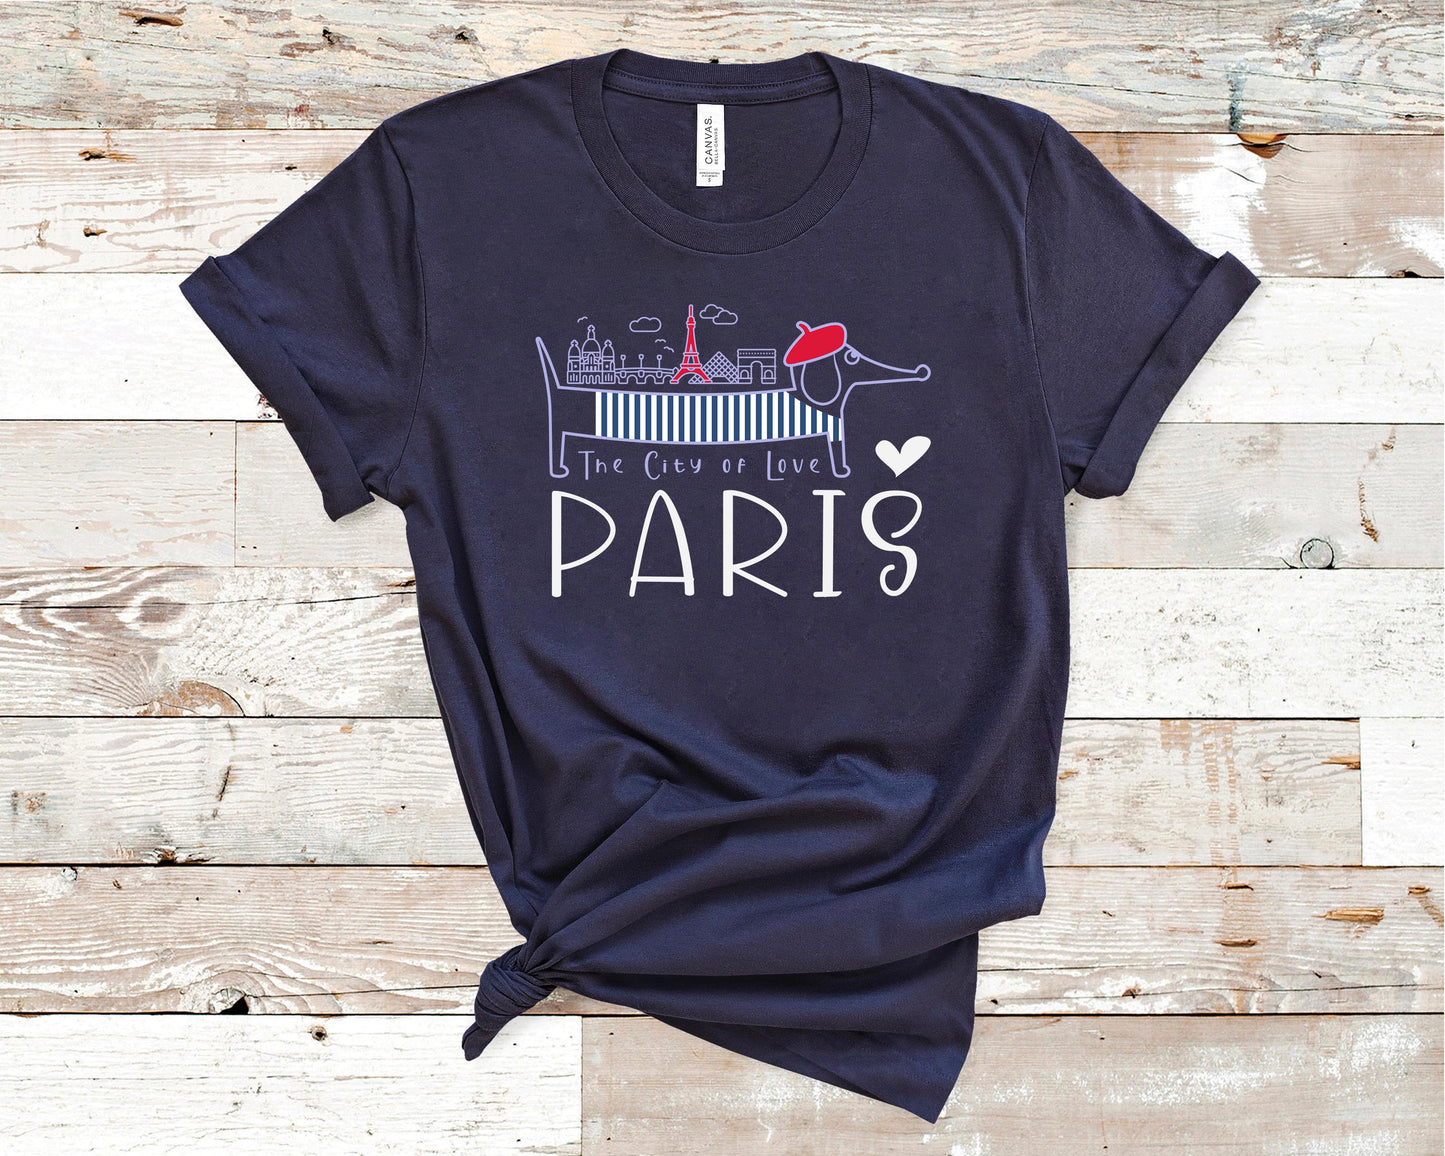 The City of Love Paris - Travel/Vacation